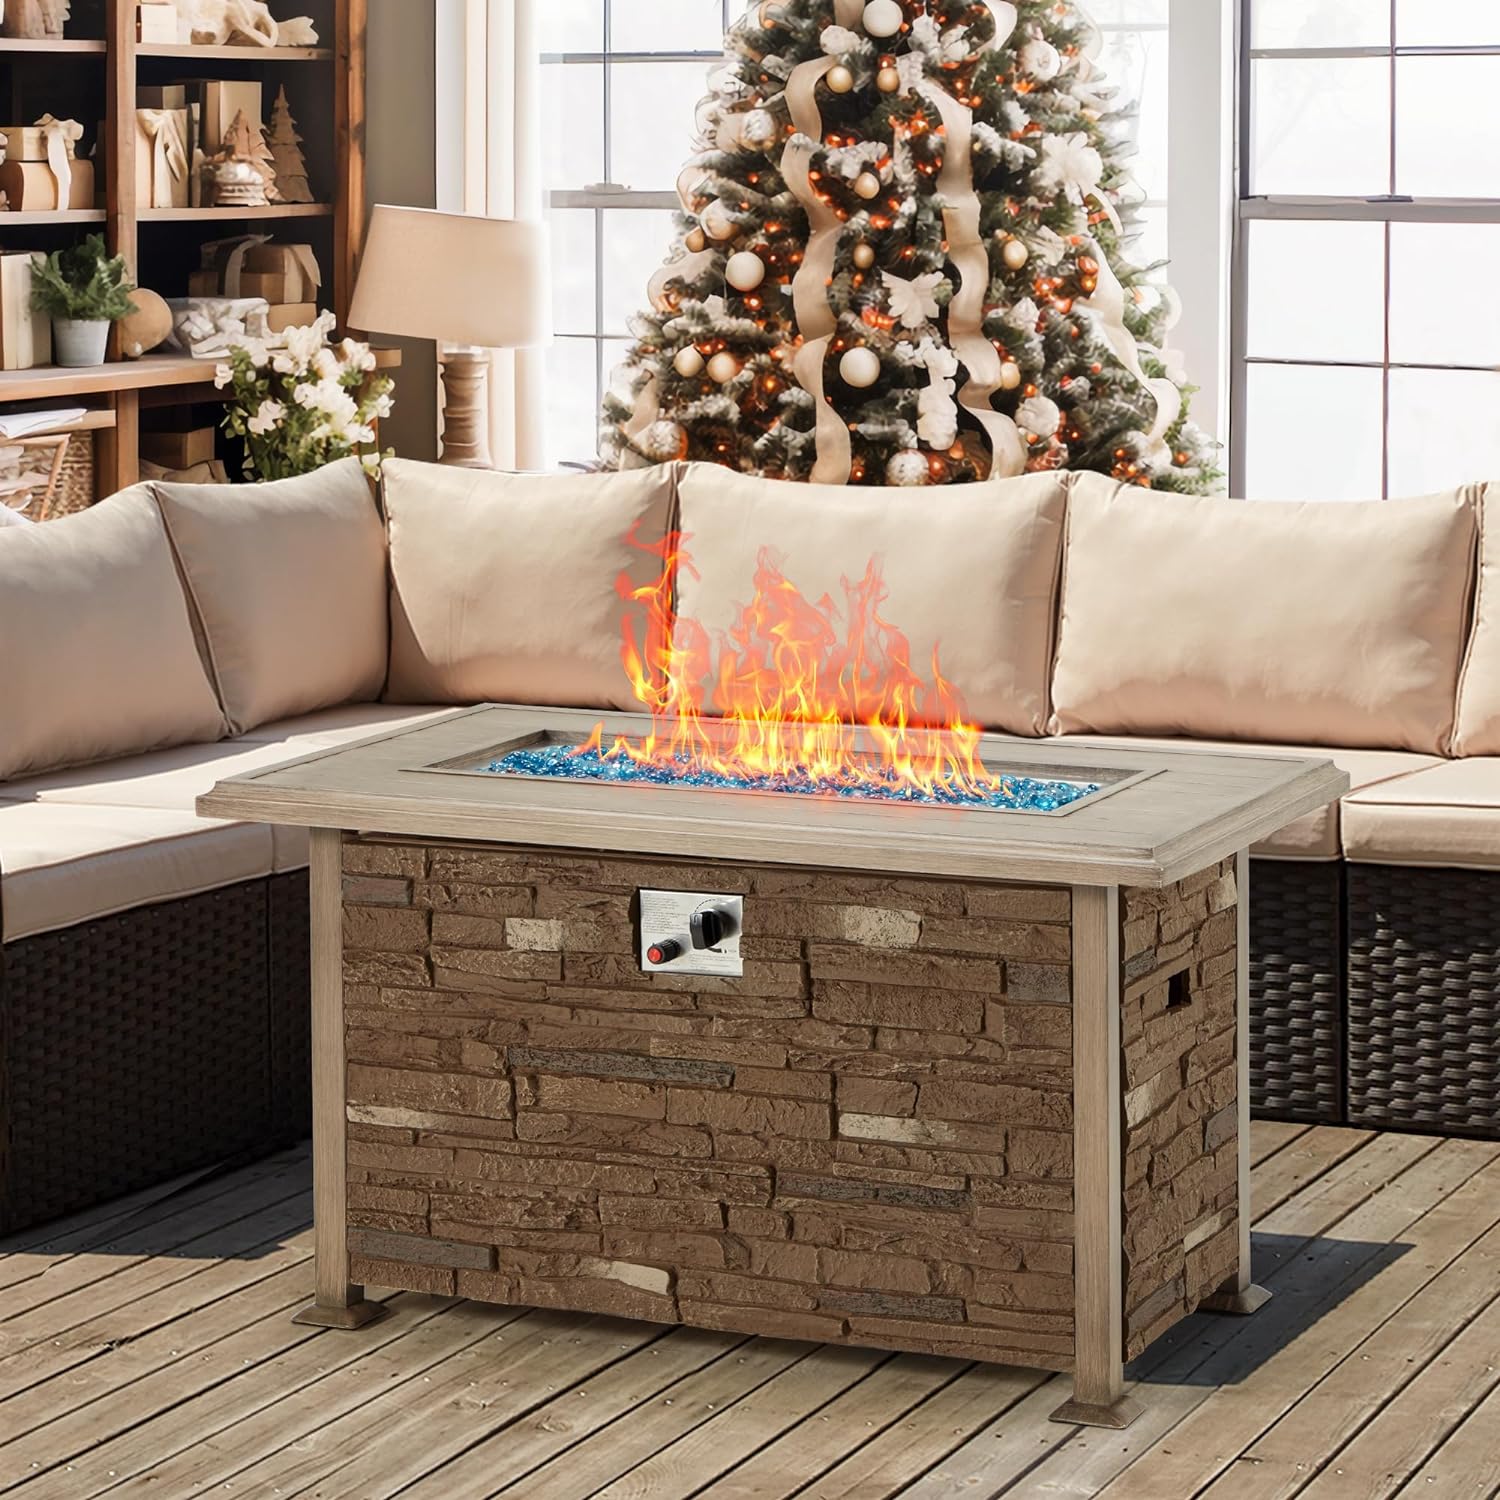 Vicluke Aluminum Propane Fire Pit Table Review